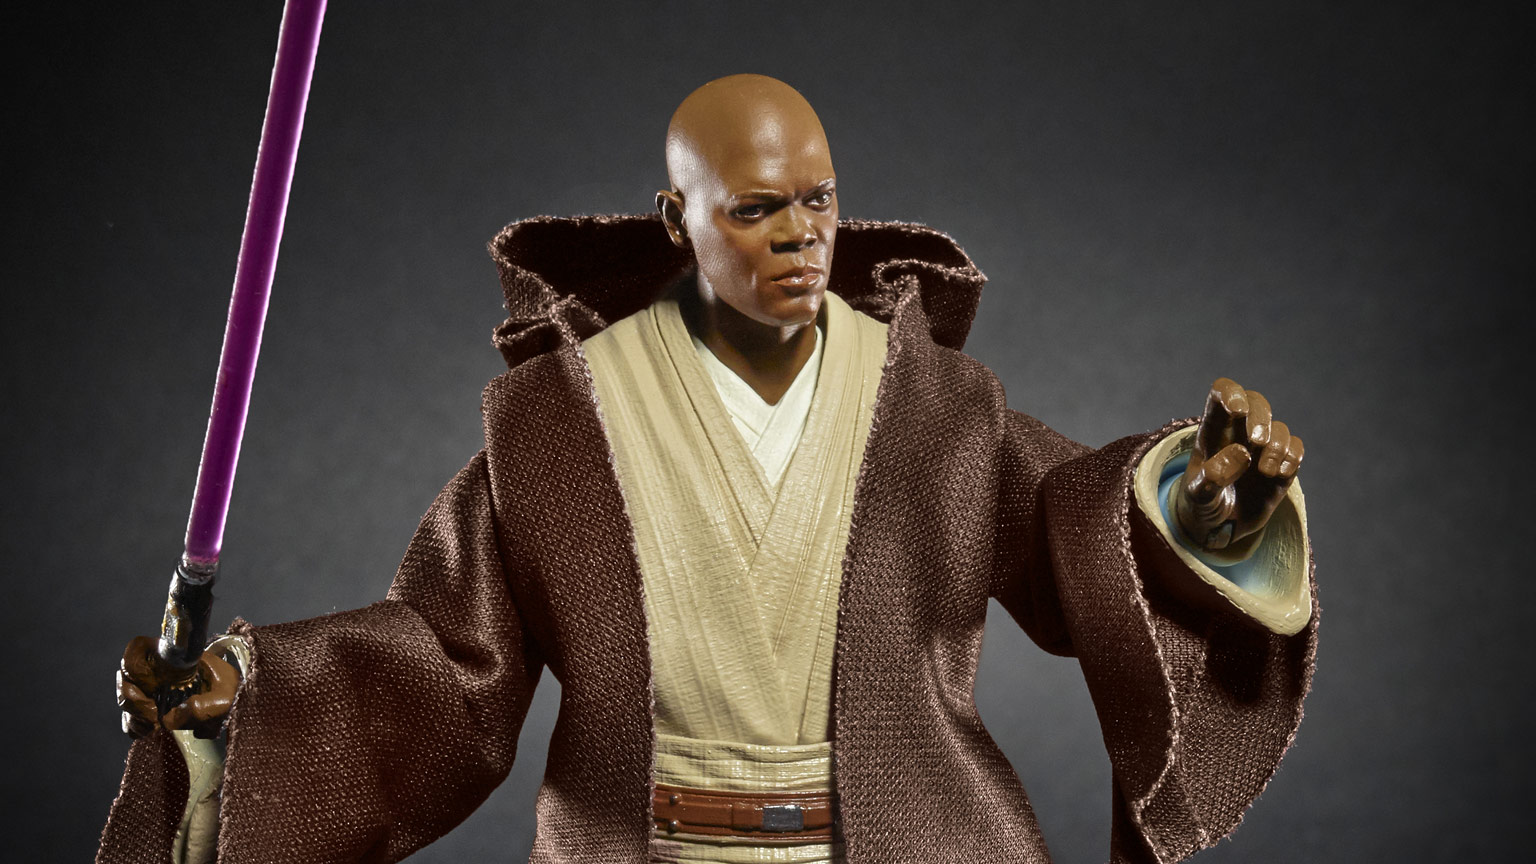 New Star Wars Black series and Vintage Collection figures coming soon